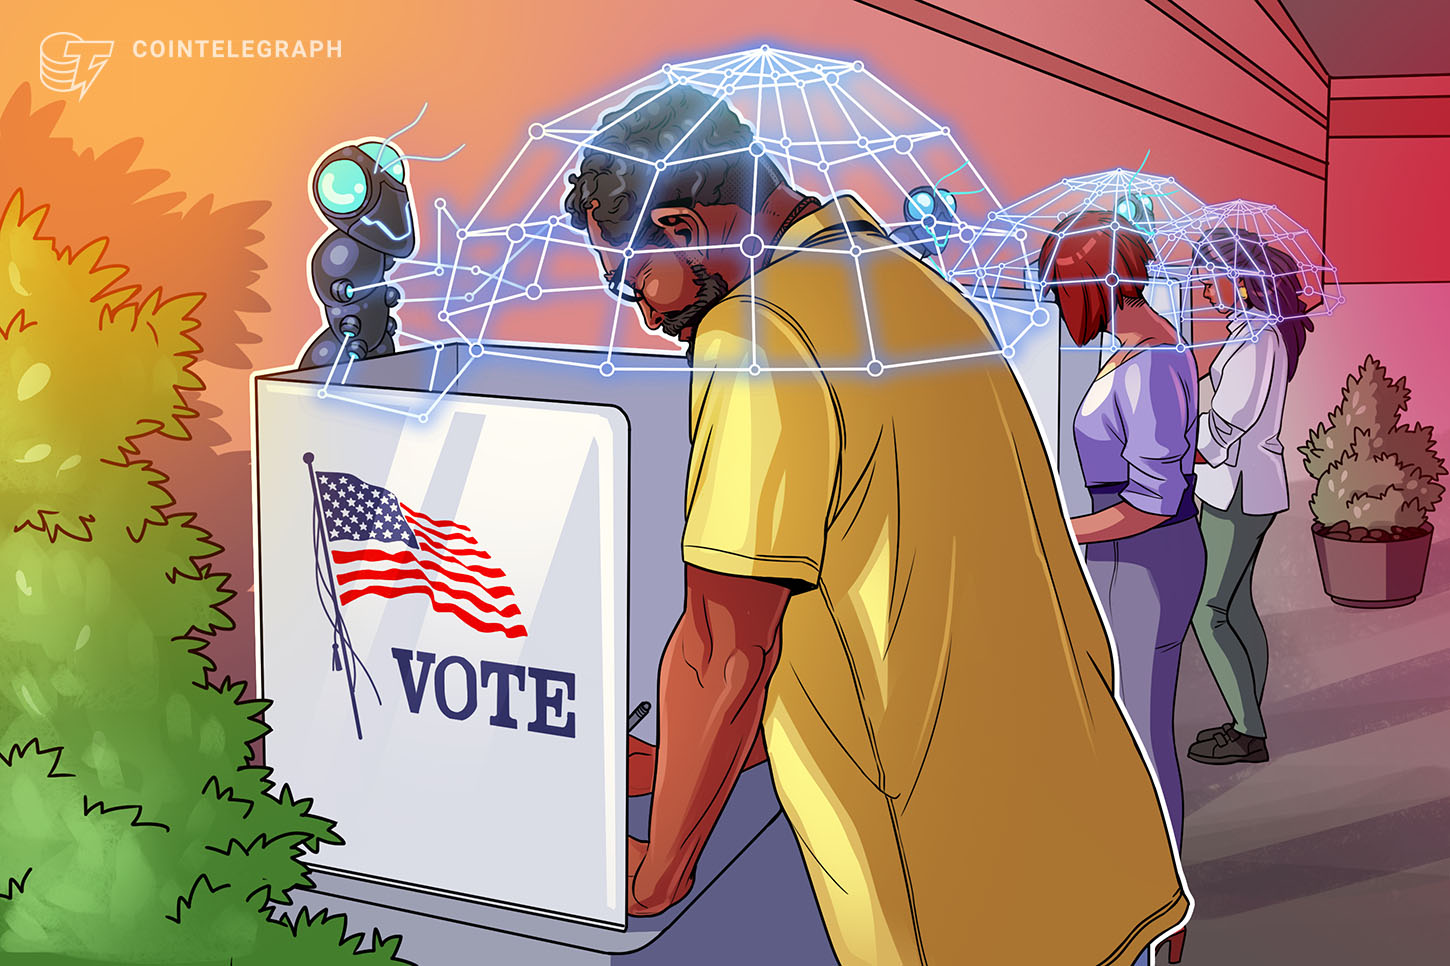 Blockchain voting is the choice for trusted democratic elections